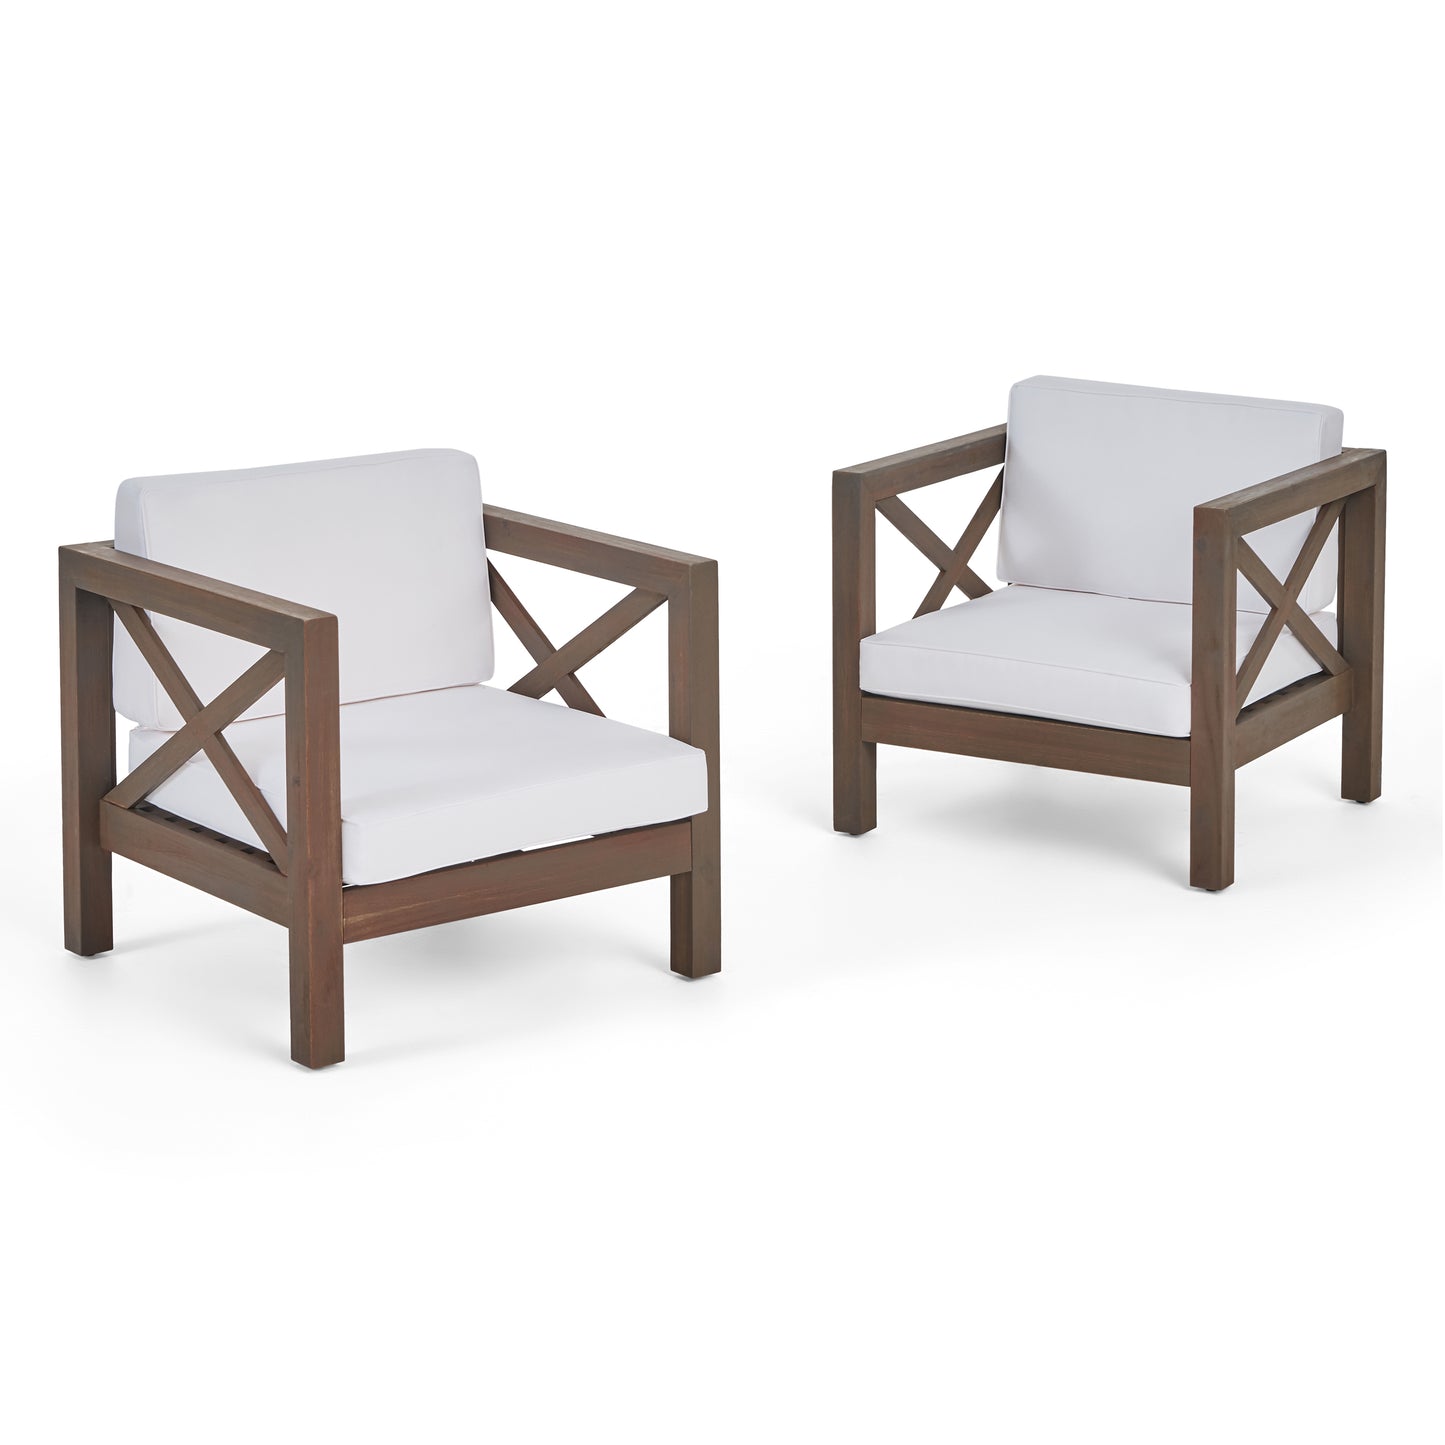 Indira Outdoor Acacia Wood Club Chairs with Cushions (Set of 2)